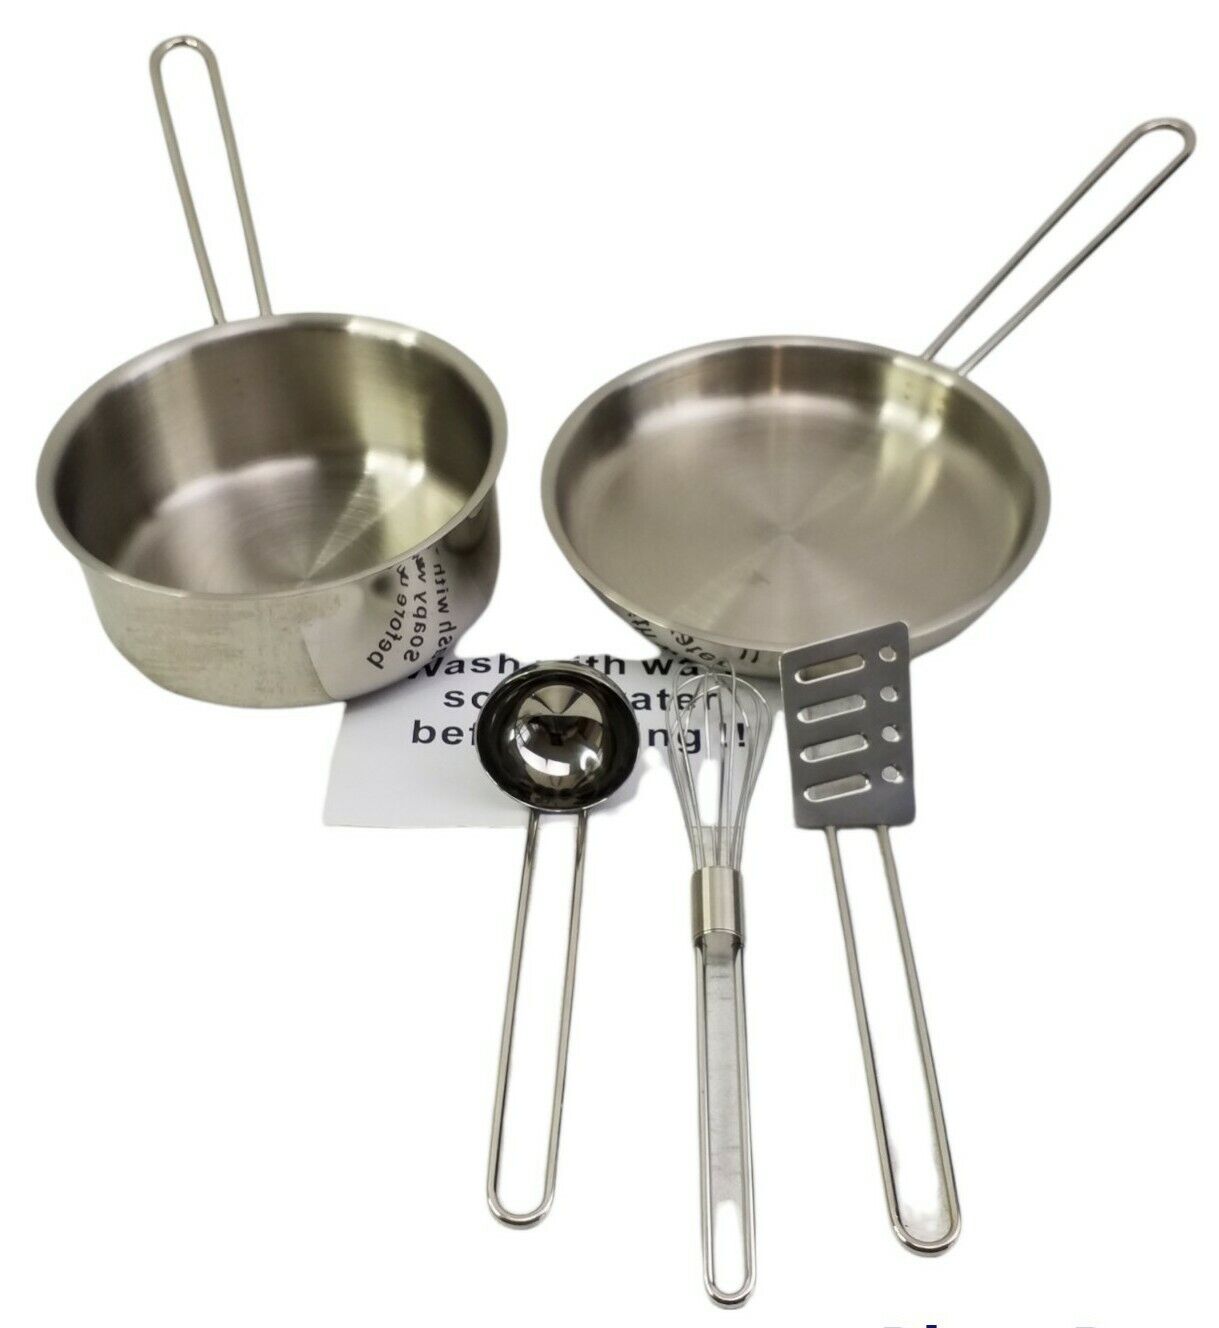 Pottery Barn Kids Kitchen Cooking Set Pots Pans Wall Decor Stainless Steel